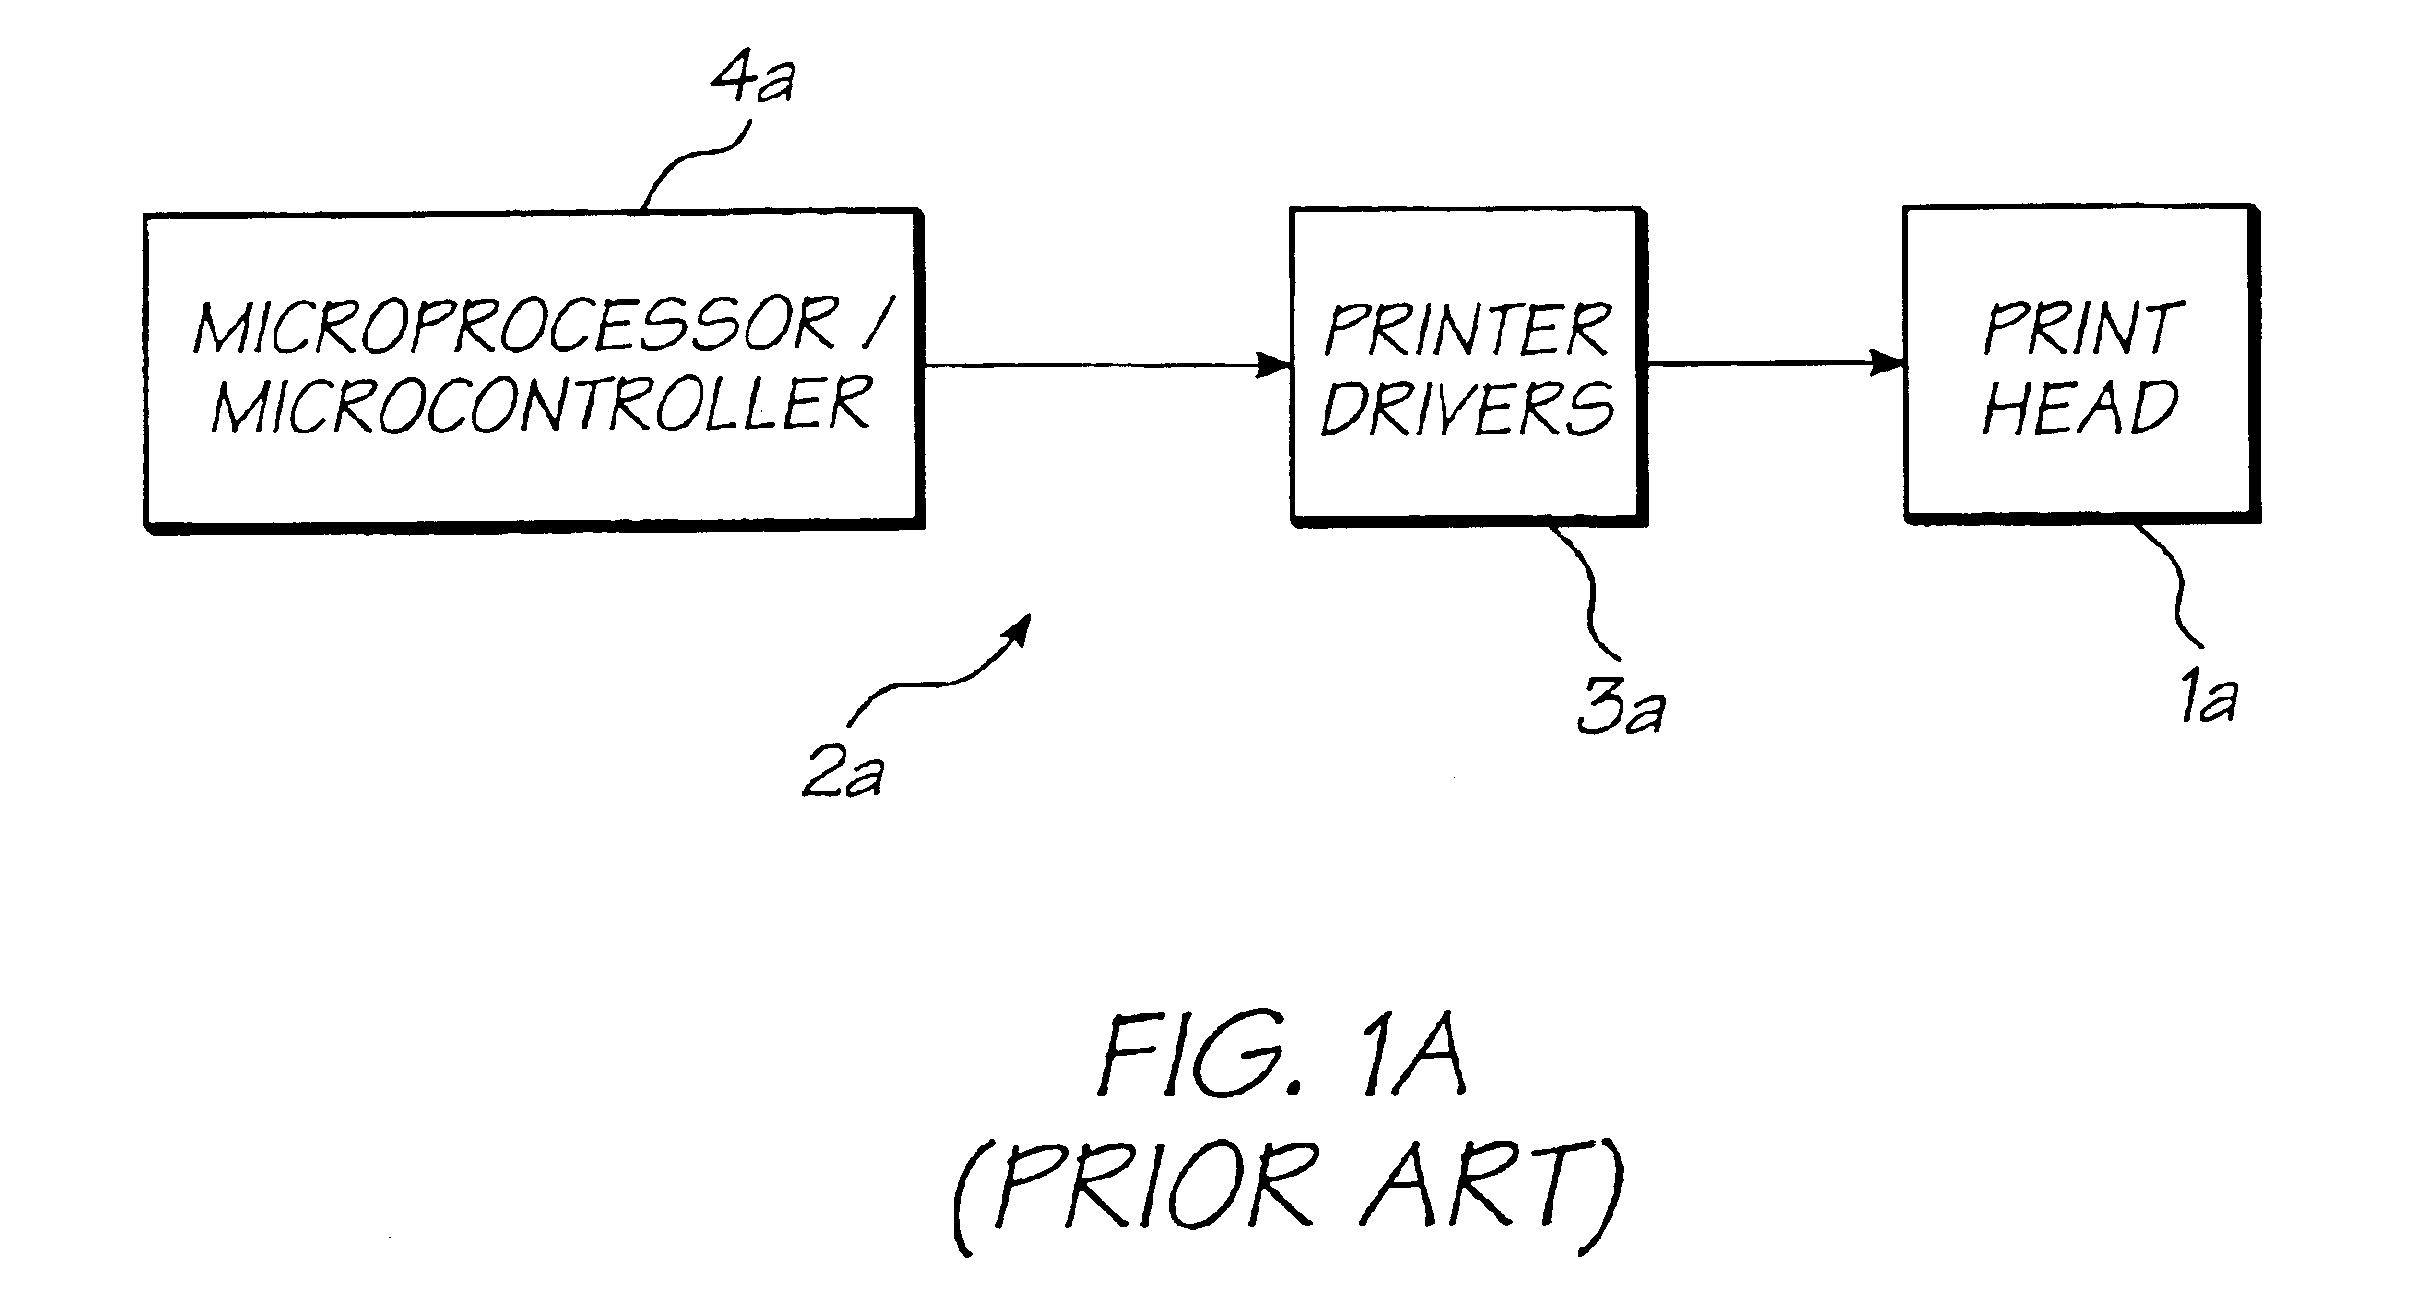 Printing cartridge with ink and print media supplies